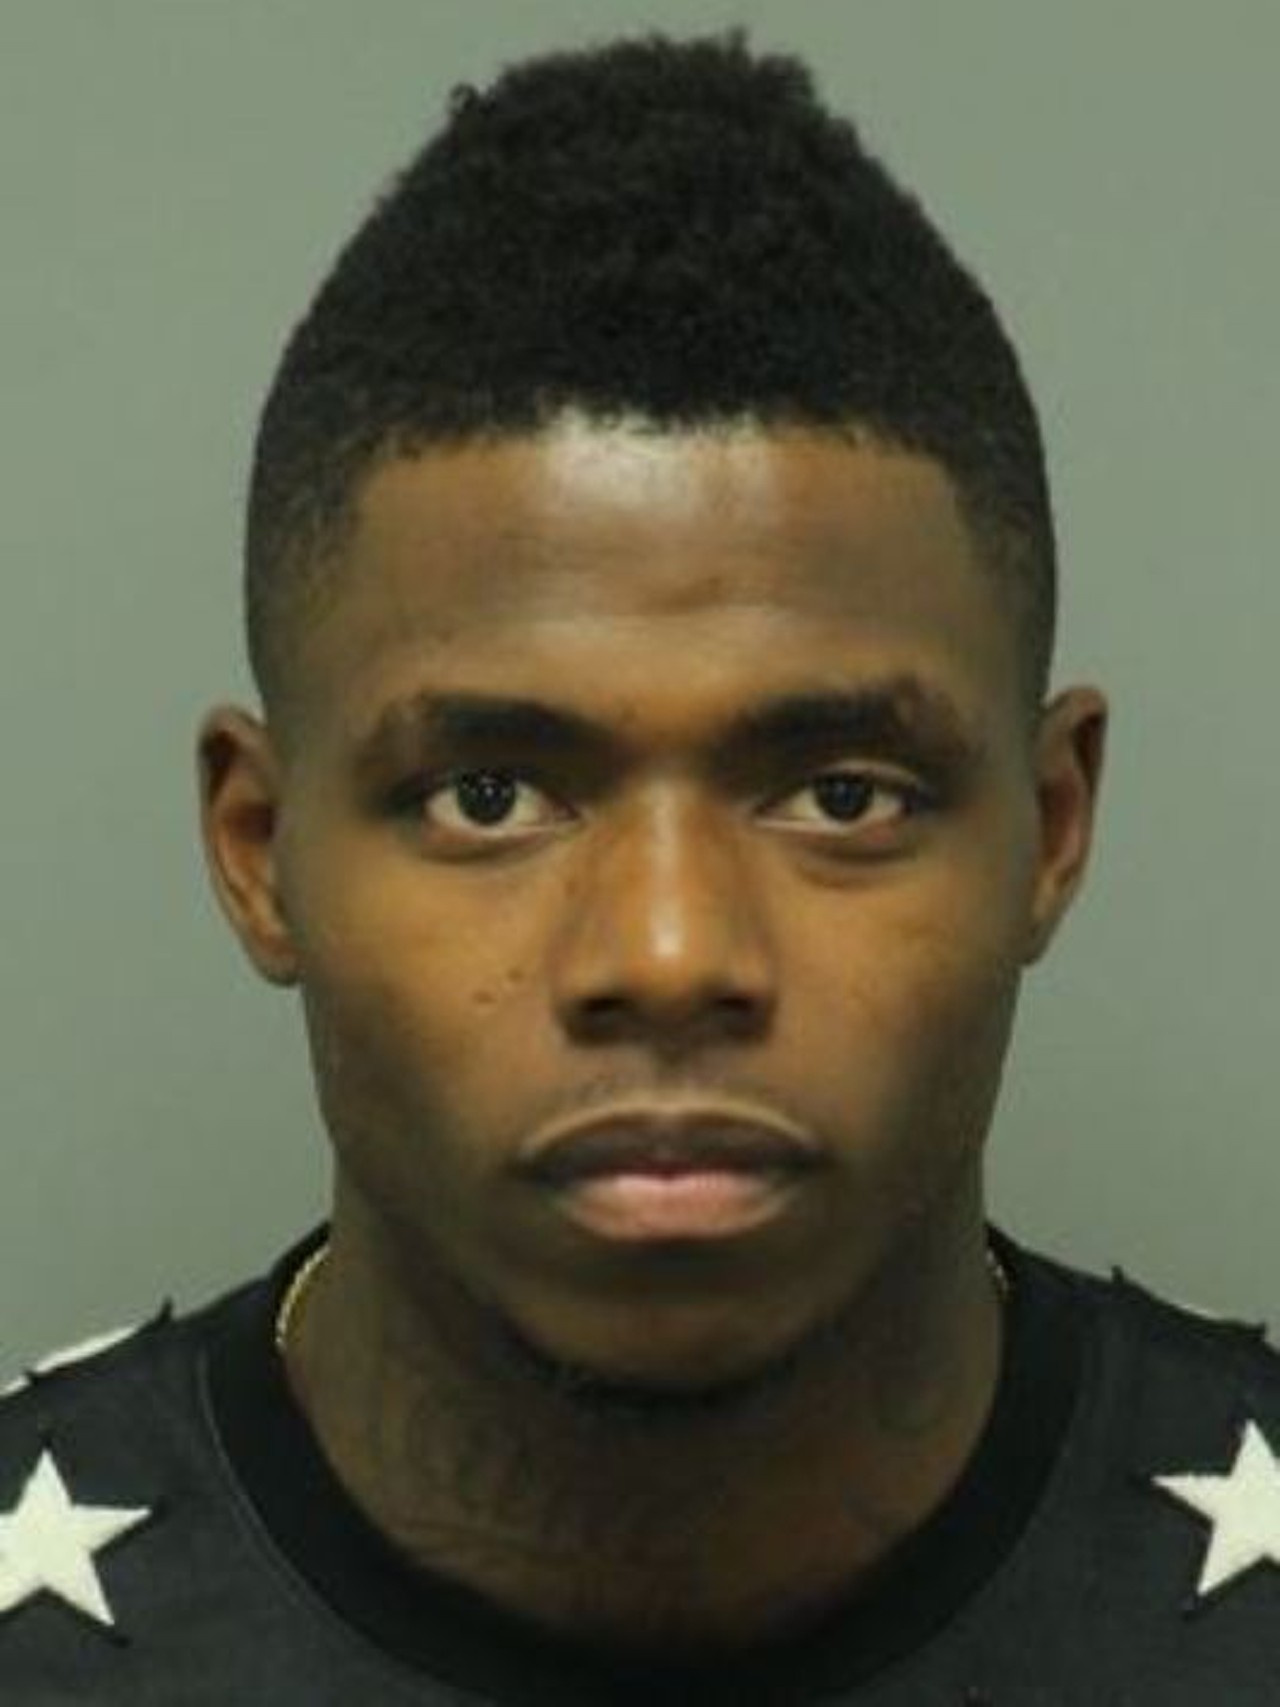 Cleveland Browns wide receiver Josh Gordon was arrested and charged with driving while impaired after speeding down a street in Raleigh, North Carolina in 2014. His blood alcohol level was .09 (the limit was .08), and he was released on $500 bond.